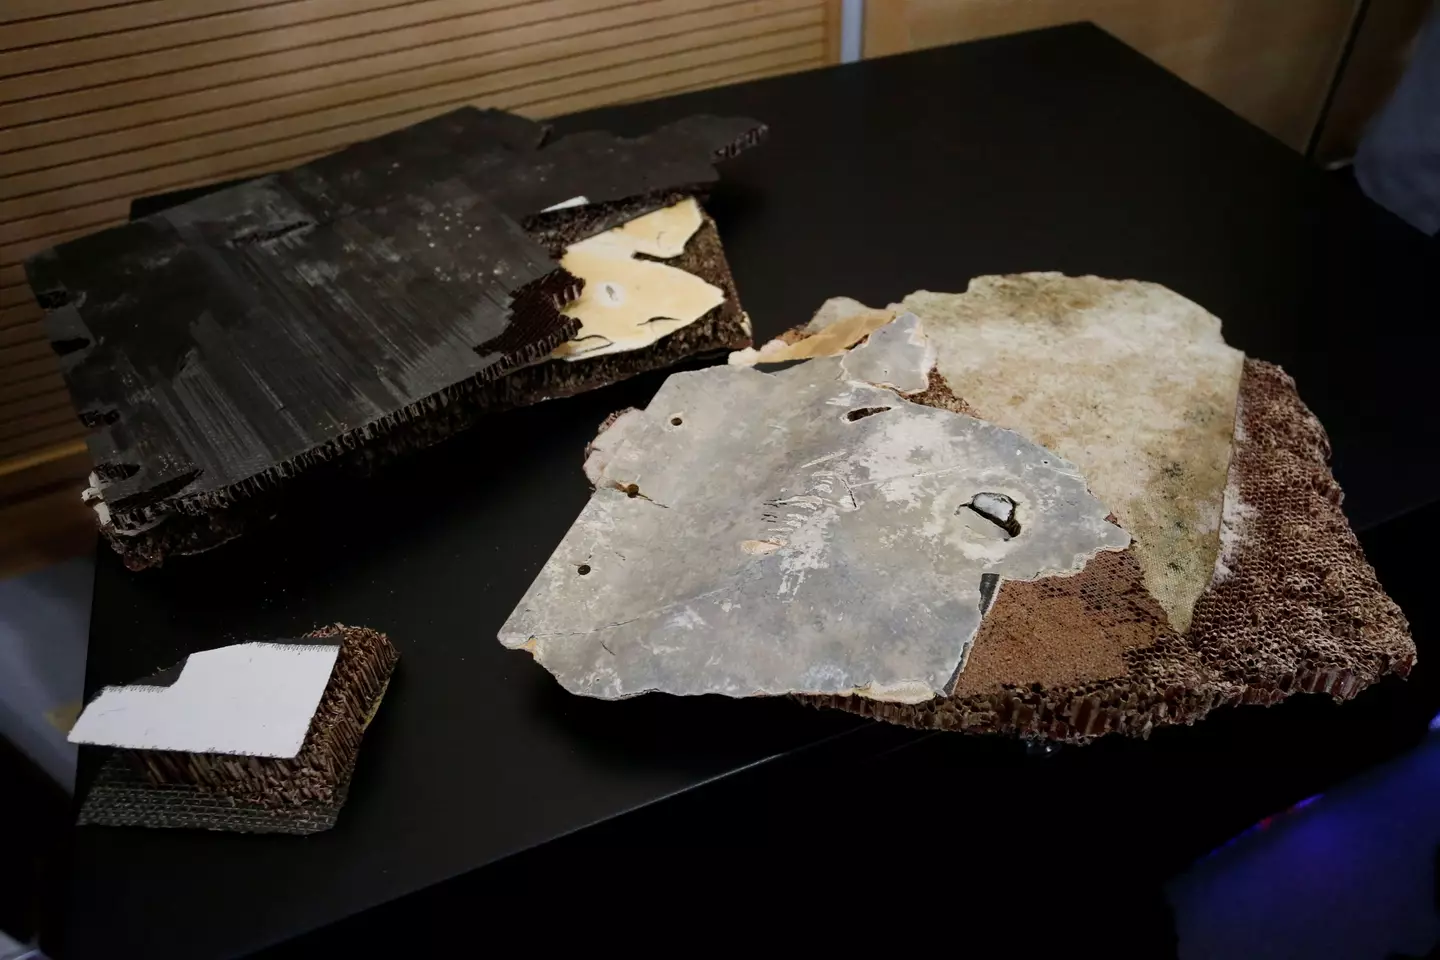 Debris believed to belong to the missing Malaysia Airlines MH370.